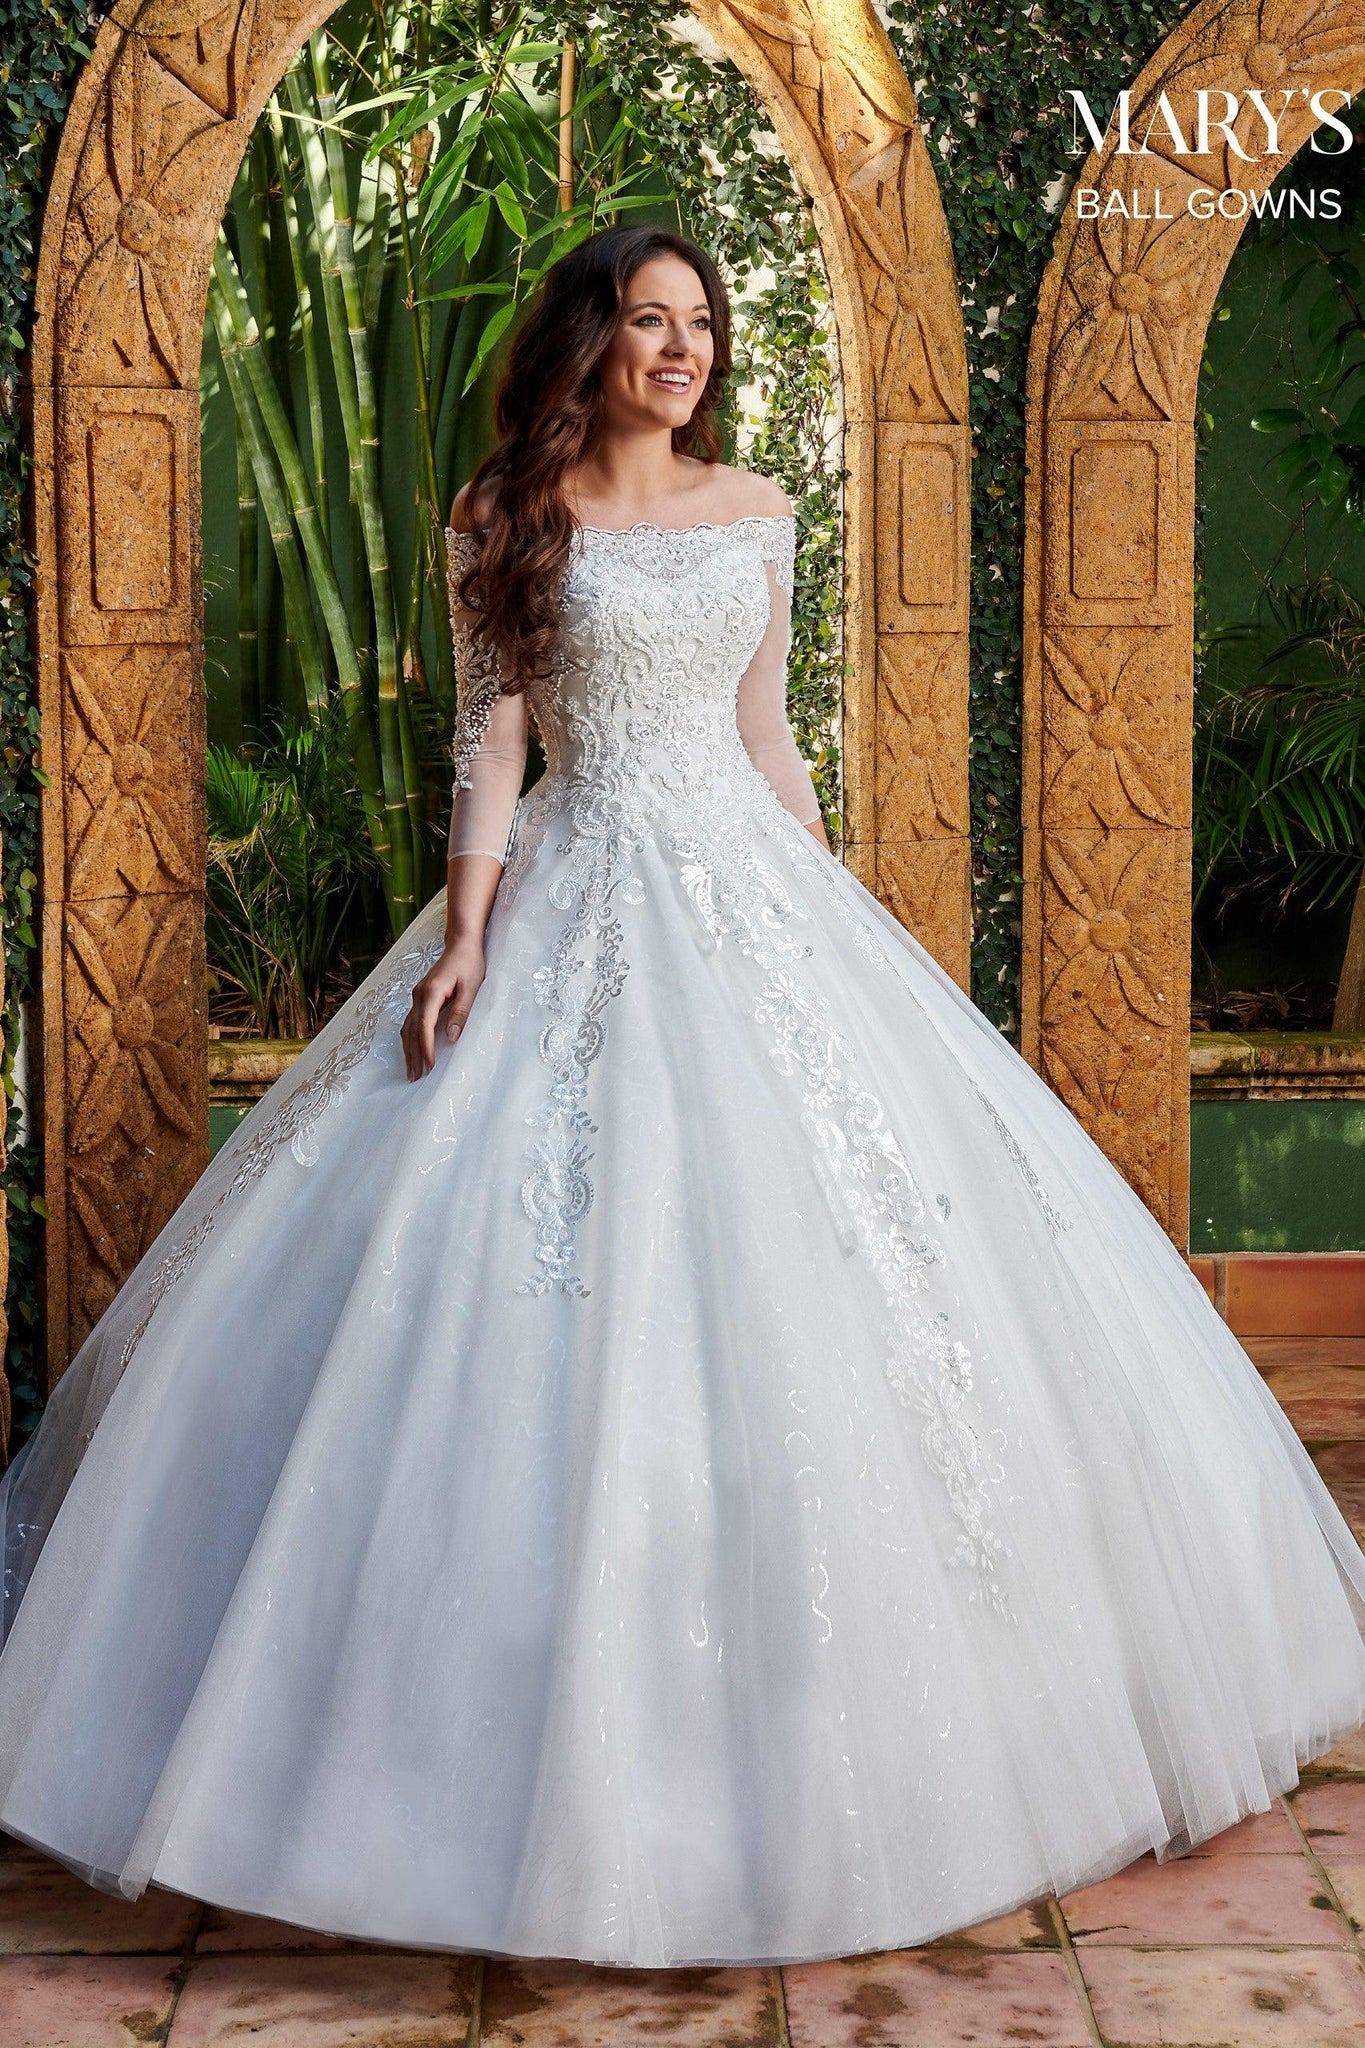 ESSEX BRIDAL SHOP CHELMSFORD Wedding Dress MARY'S Bridal Gown MB6072 —  Adore Bridal and Occasion Wear